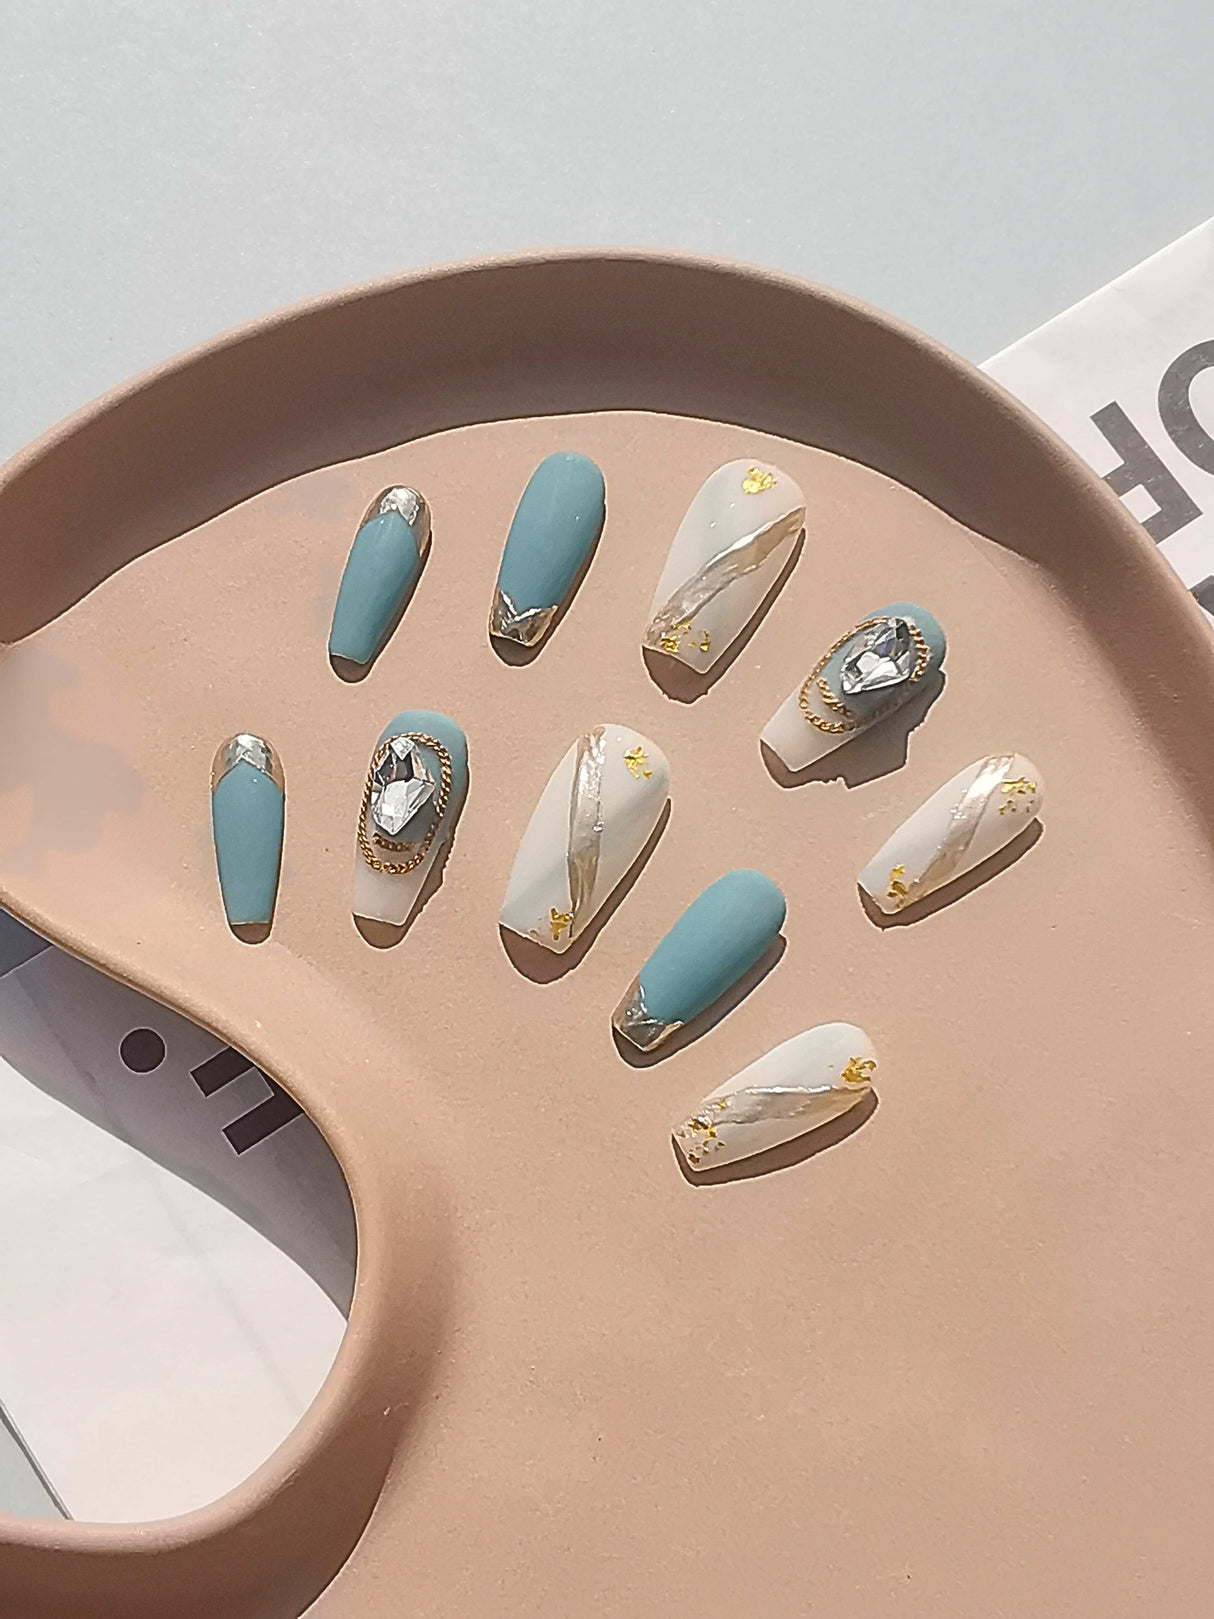 These trendy nails includes gold foil accents, star decals, and gemstone embellishments, and they come with a soft pink or peach tray for display.